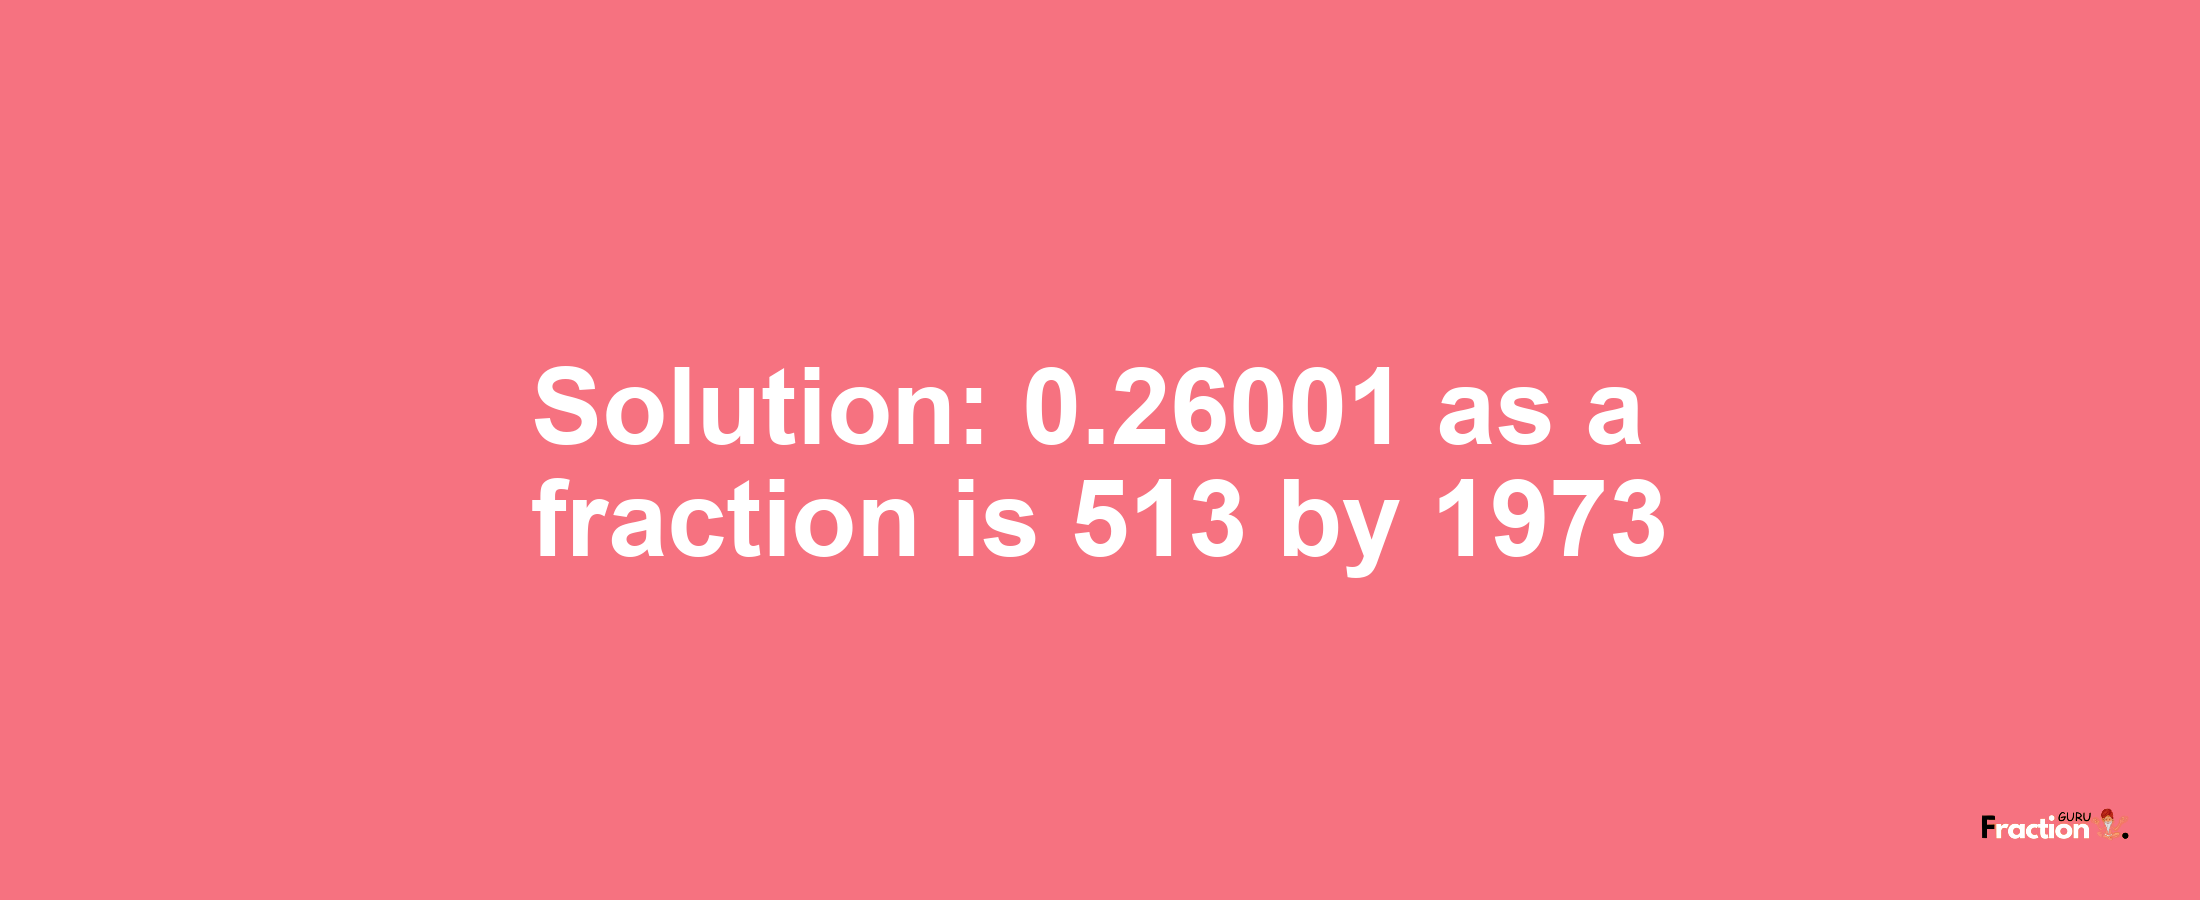 Solution:0.26001 as a fraction is 513/1973